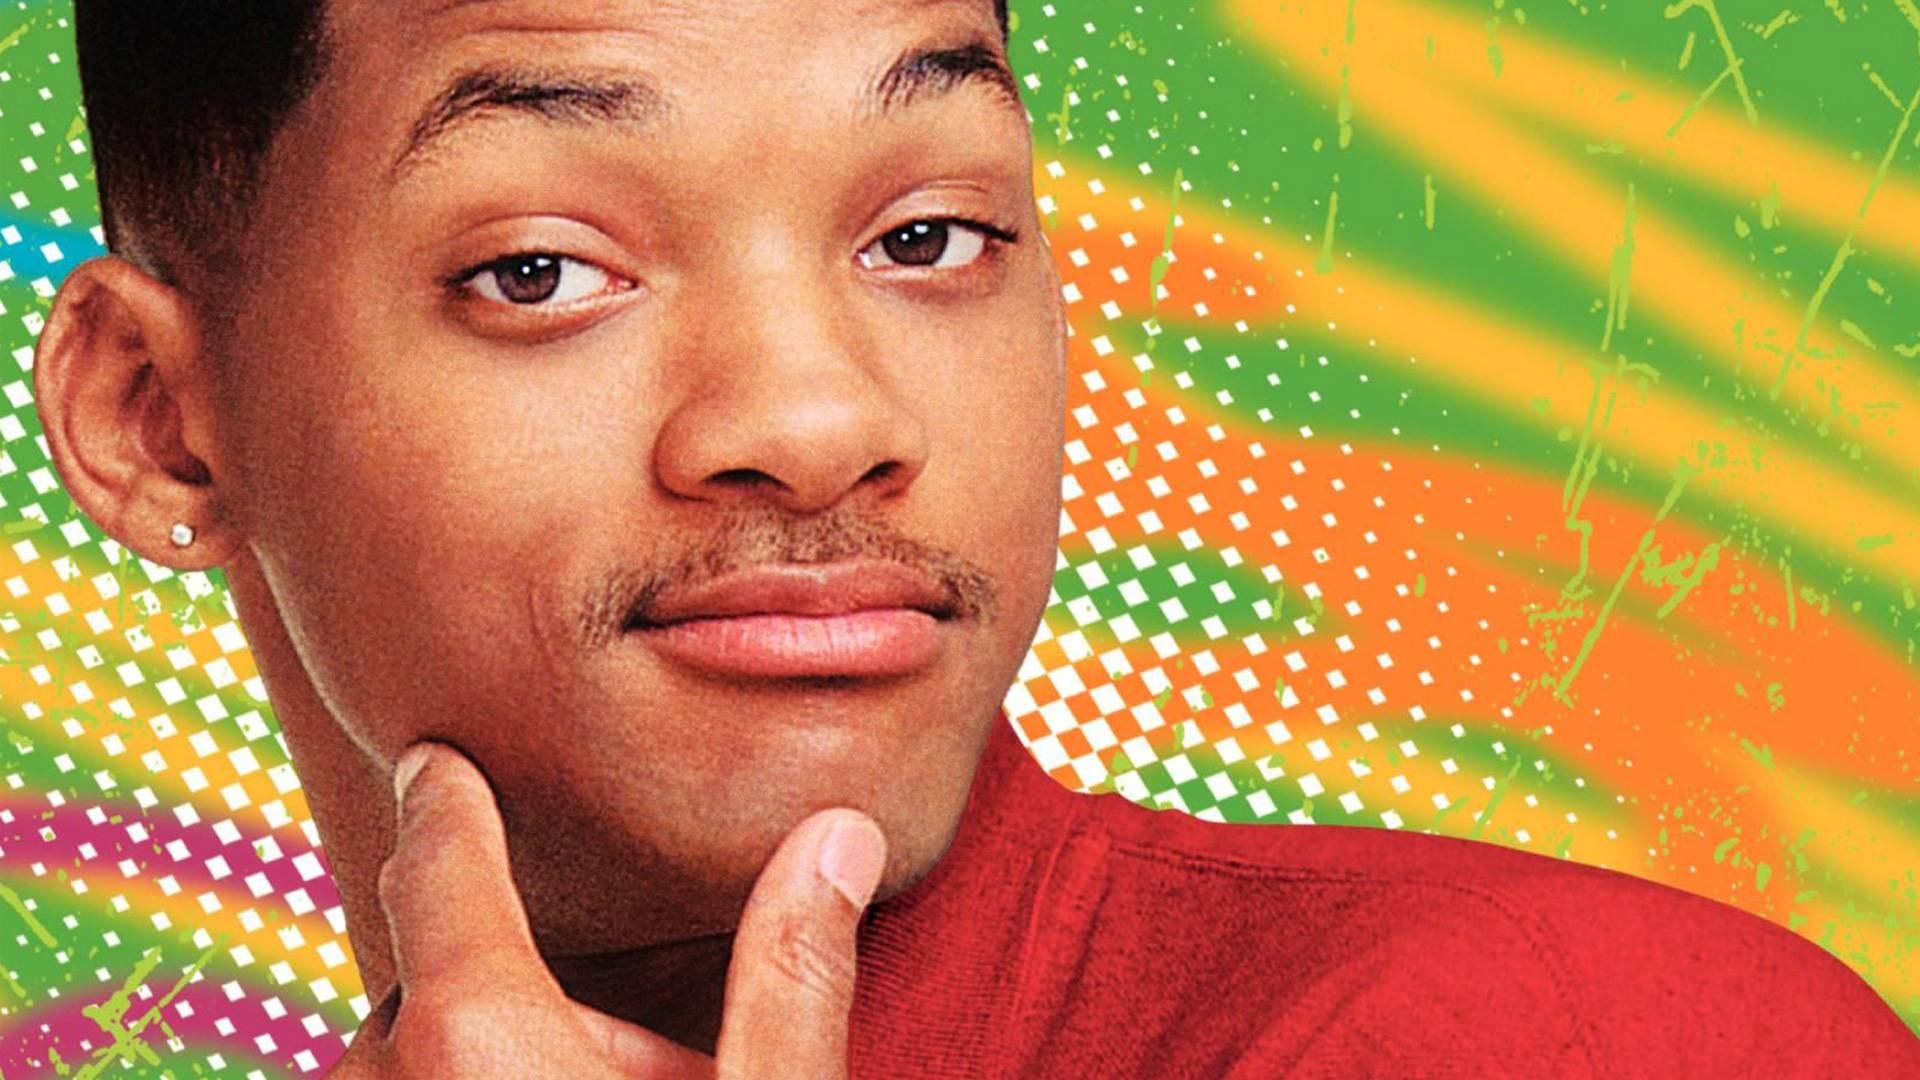 fresh prince of bel air, Comedy, Sitcom, Series, Television, Will, Smith, Fresh, Prince, Bel, Air Wallpaper